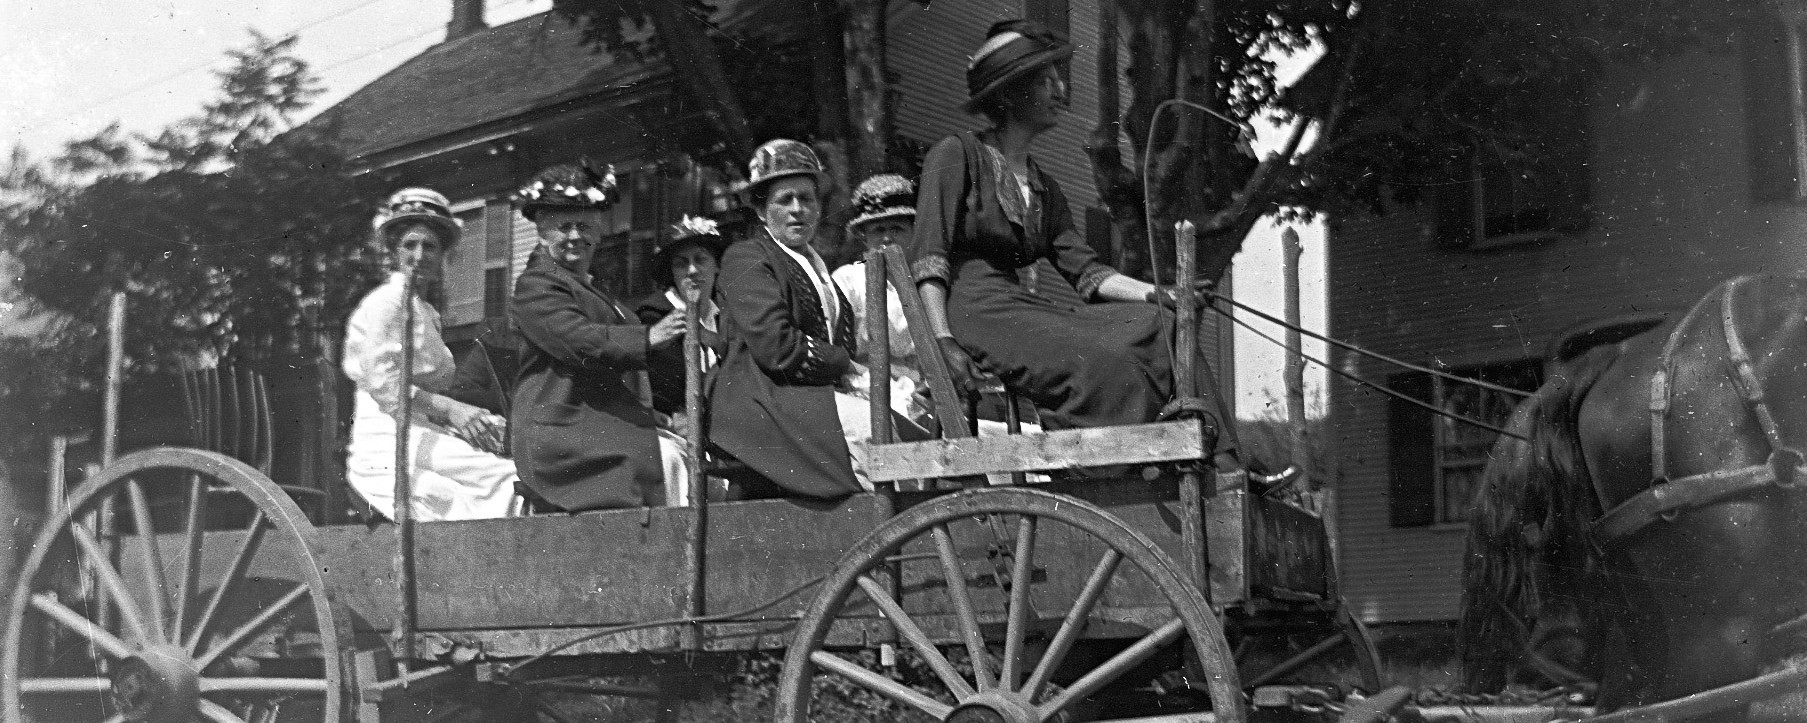 Photo of women in a wagon, George Swallow Photographer